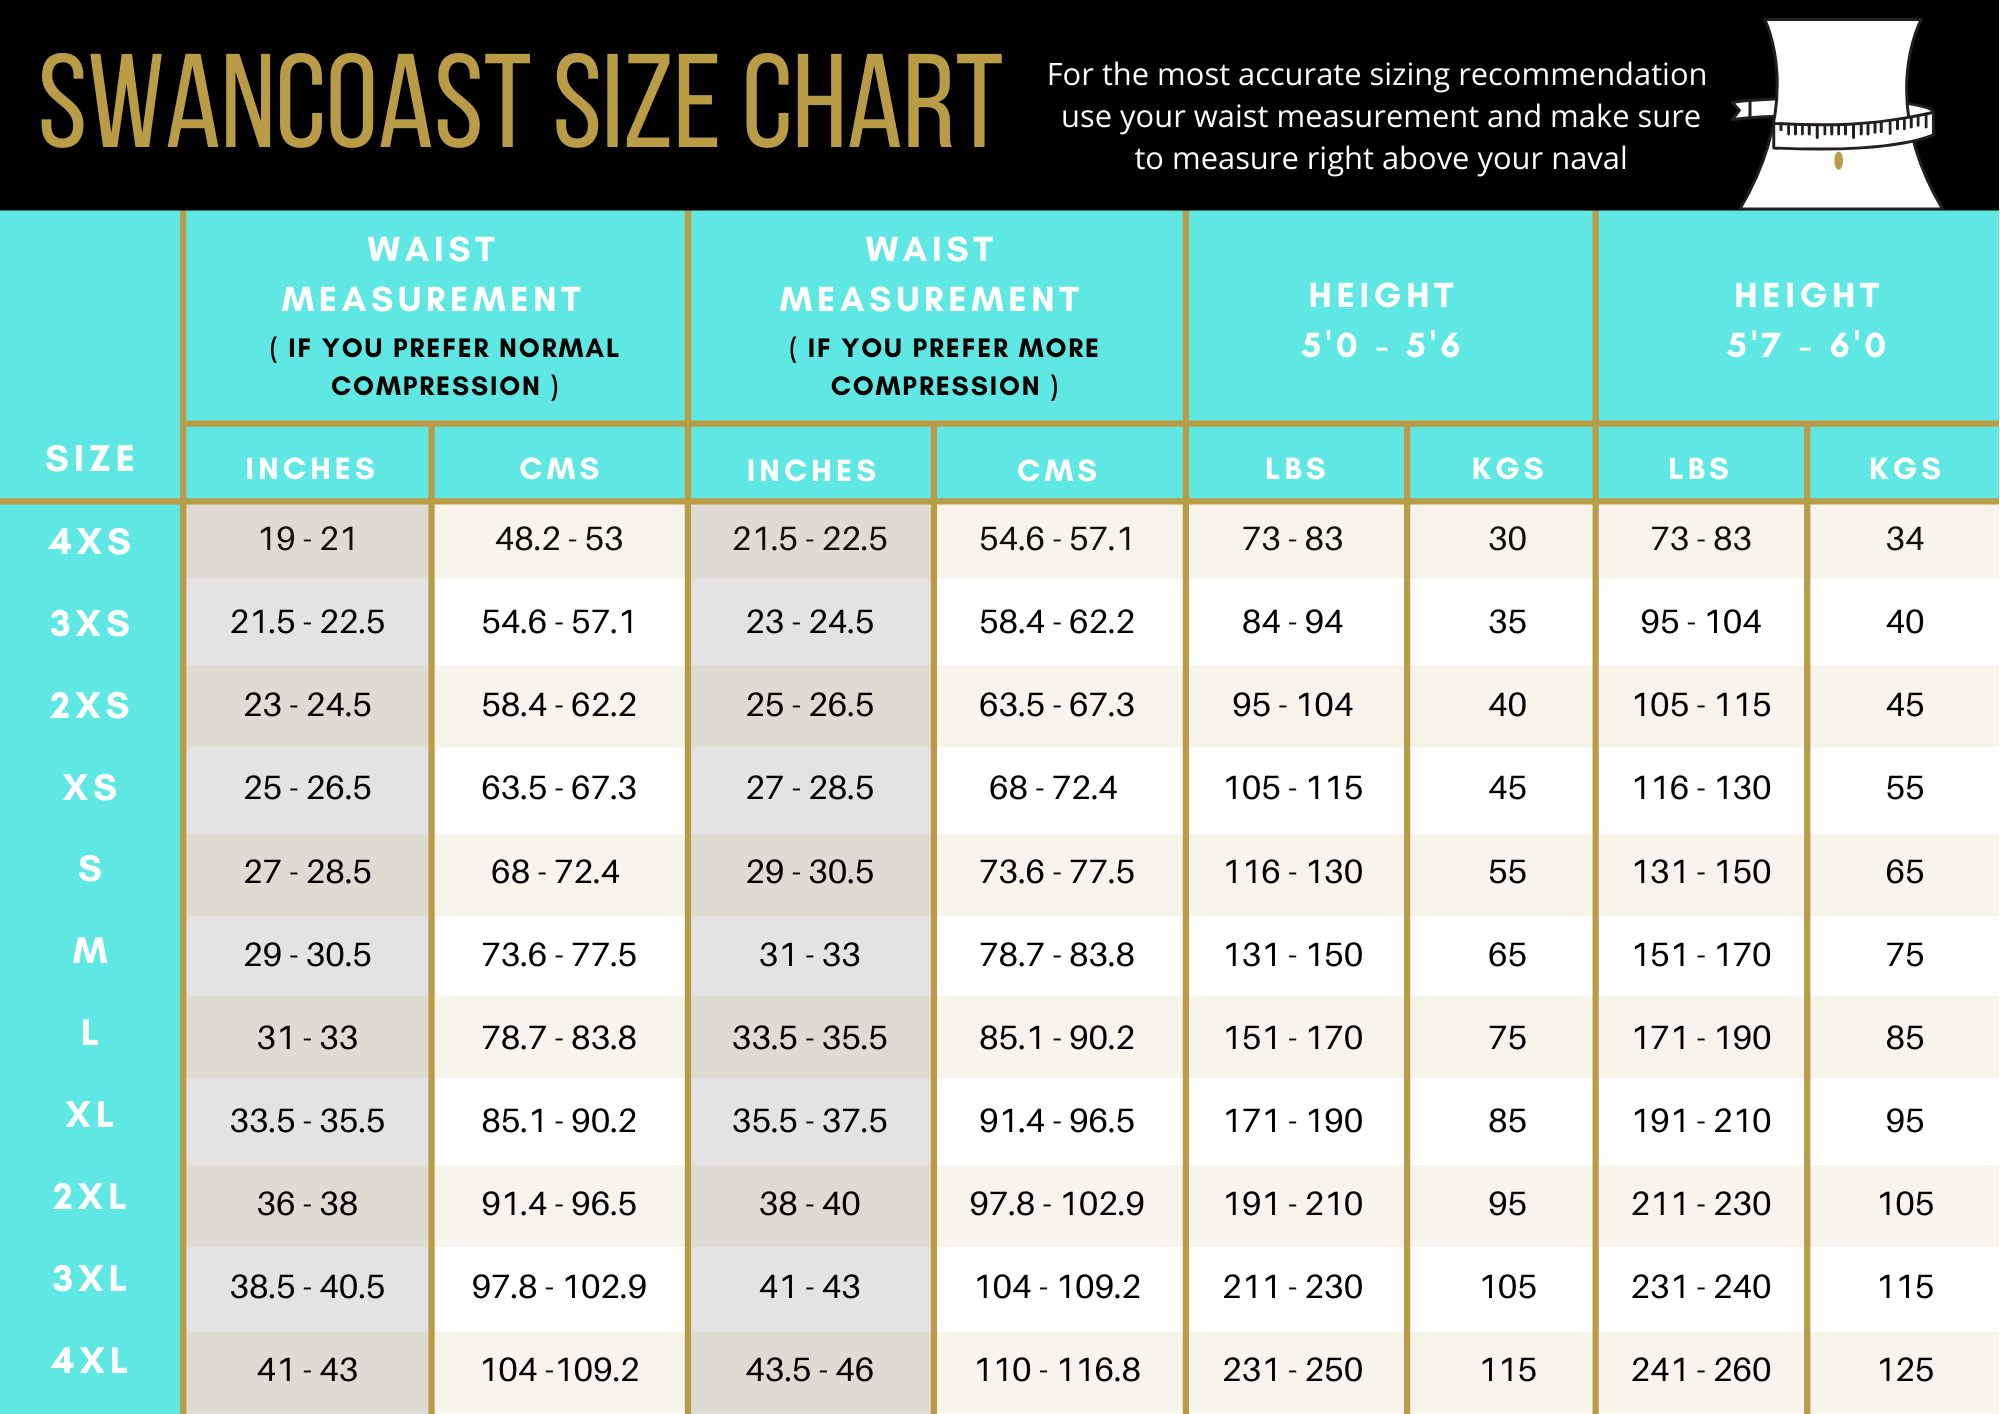 Swancoast - Size Chart and Guideline